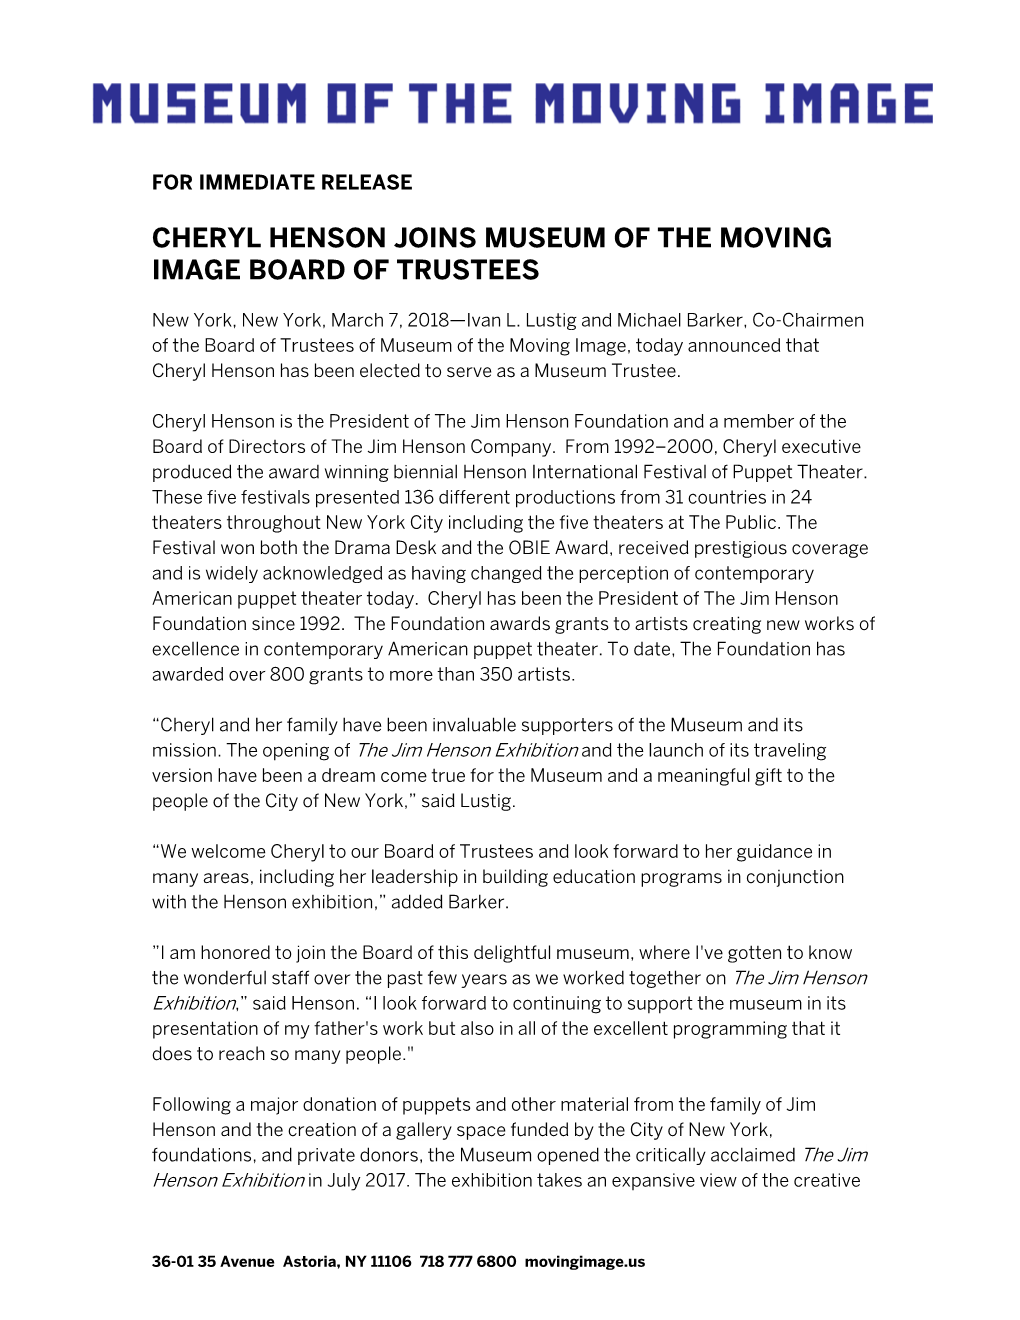 Cheryl Henson Joins Museum of the Moving Image Board of Trustees